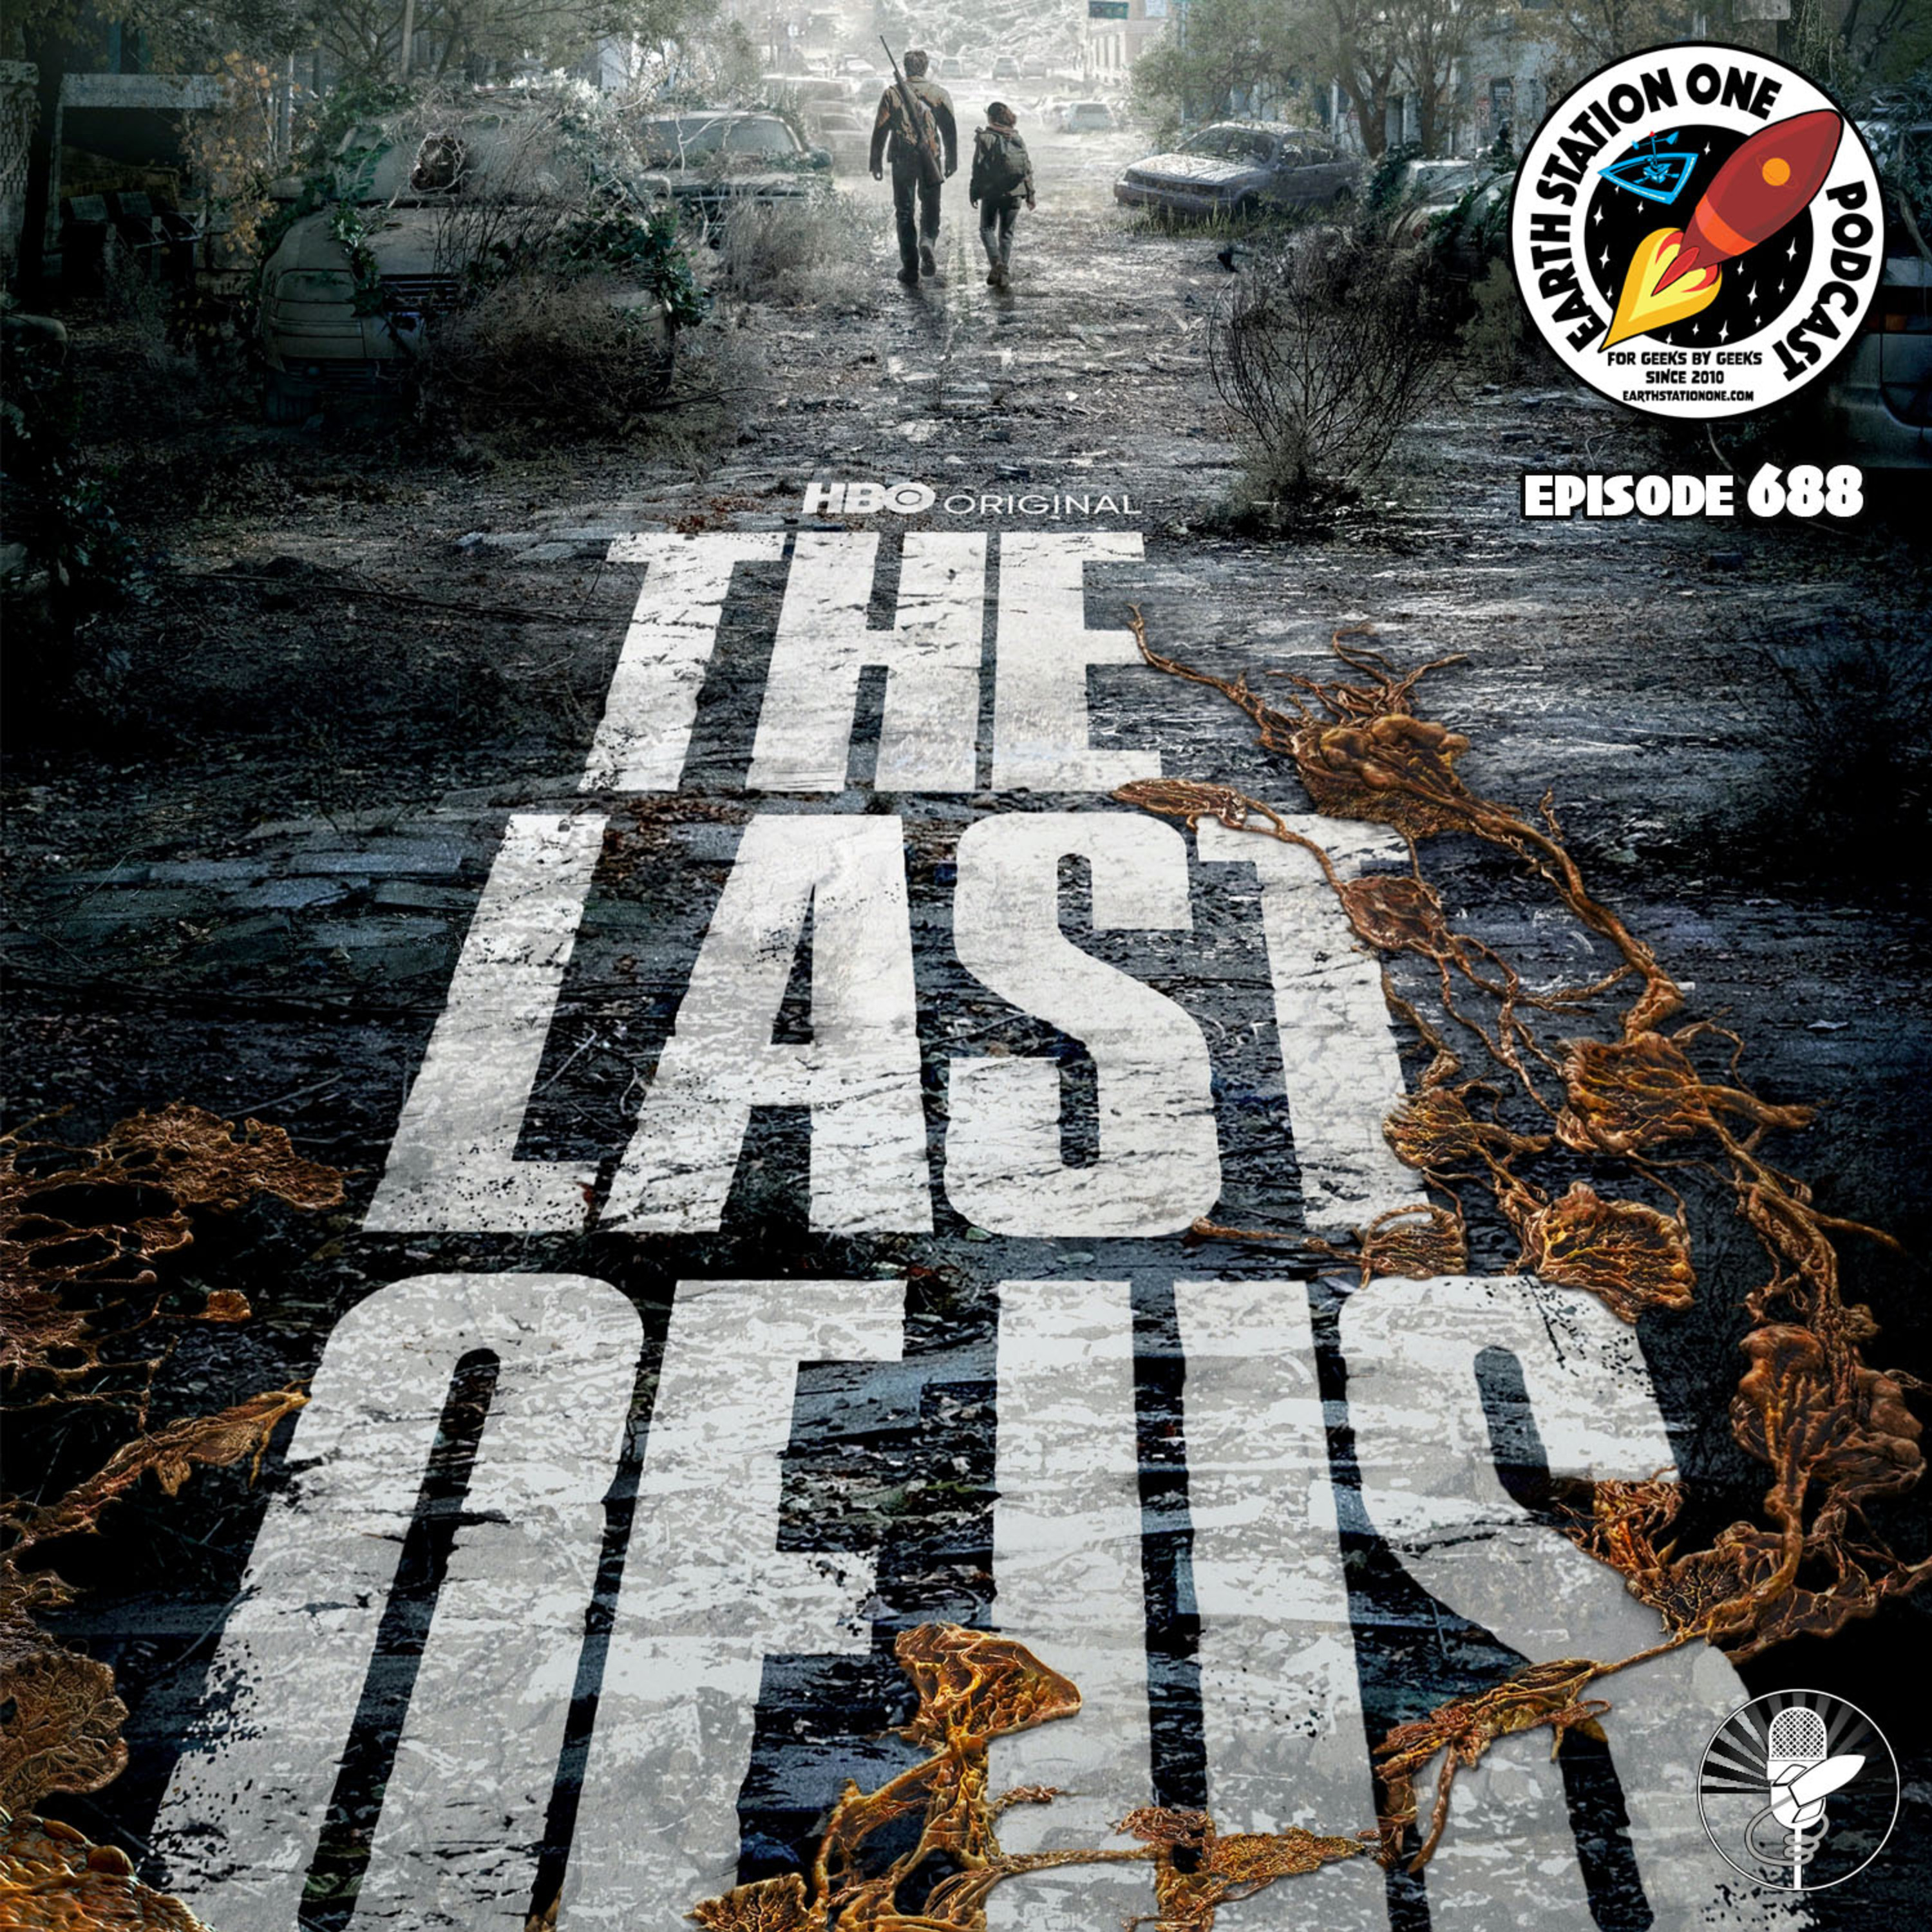 The Earth Station One Podcast - The Last of Us Season One Review